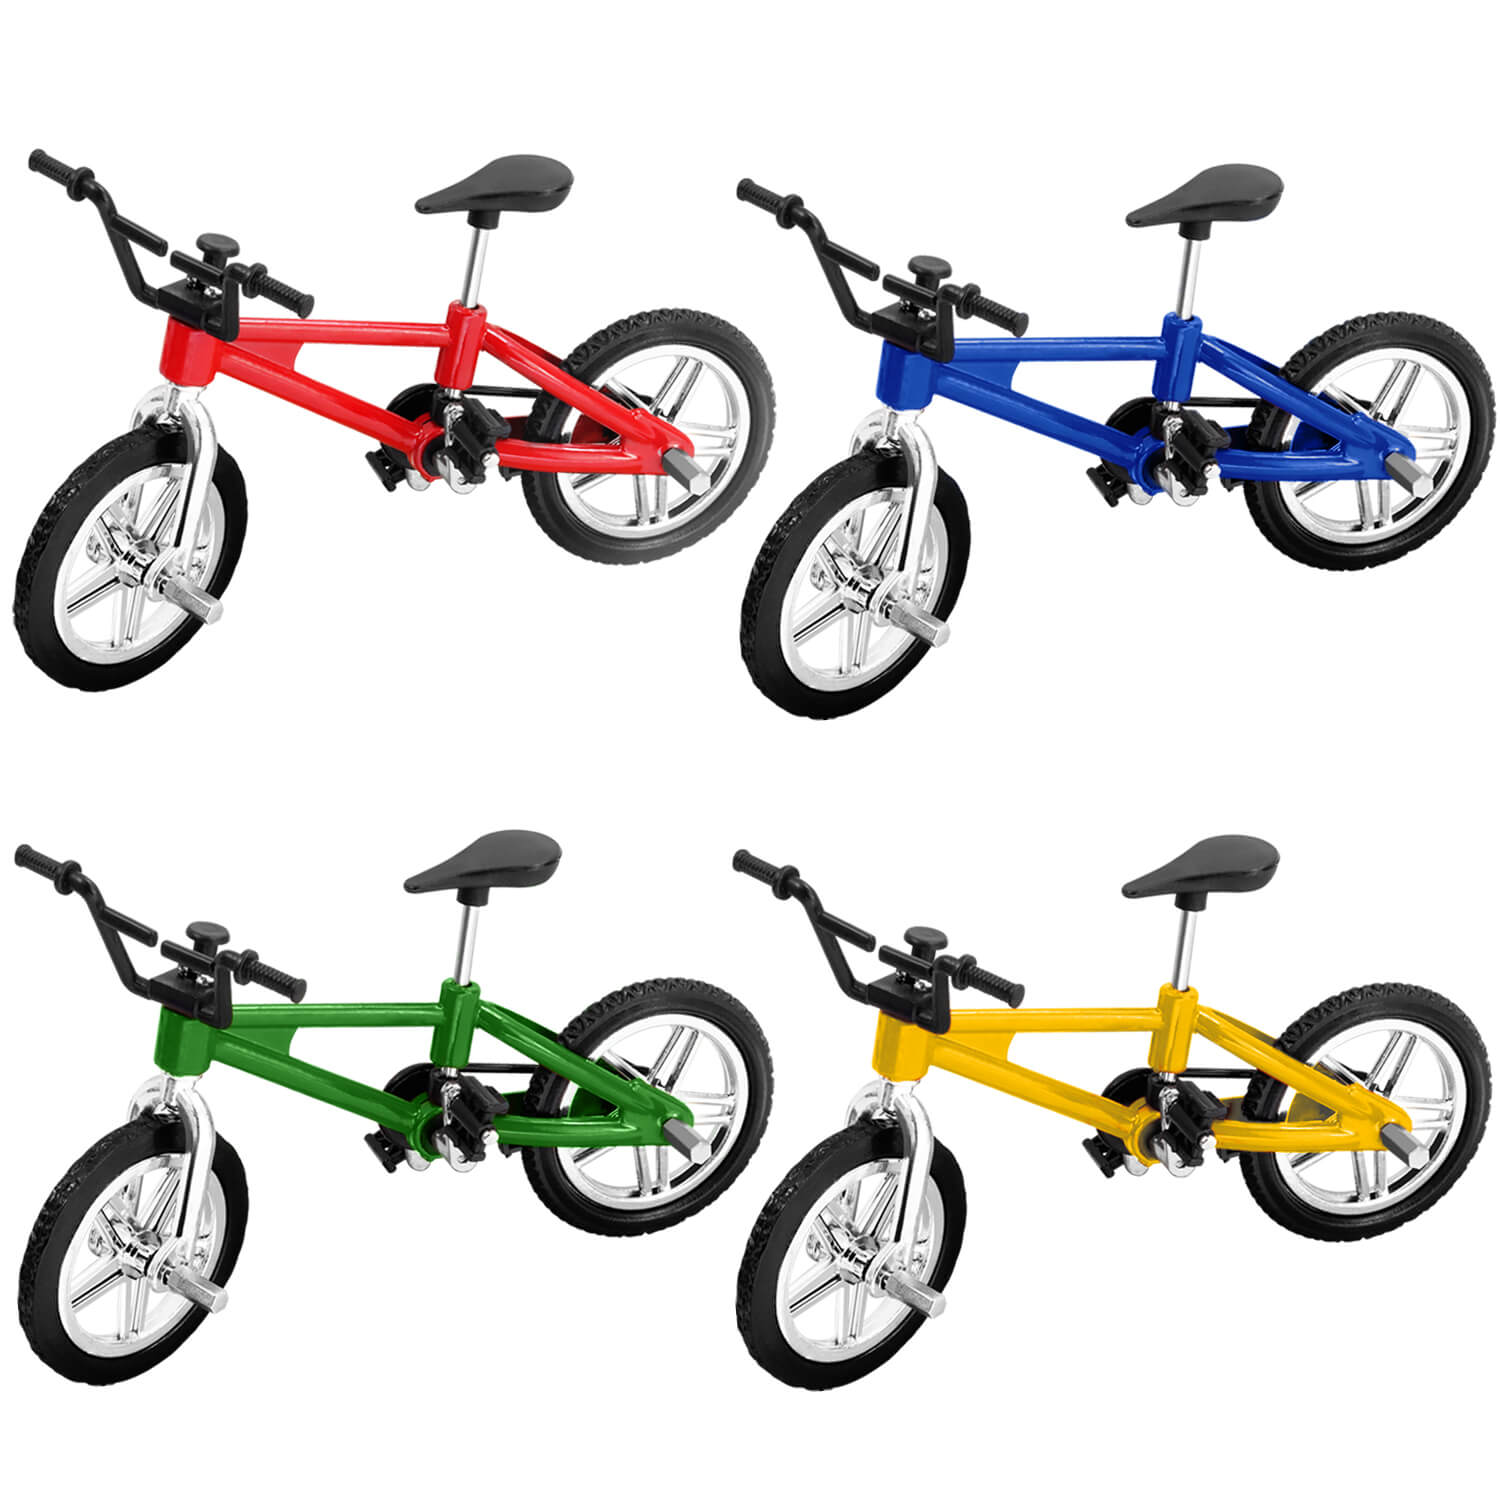 Hotusi 9pcs Mini Finger Bikes Mini Extreme Sports Finger Bicycle Toy Creative Game Toy Cool Boy Gifts Random Colors 